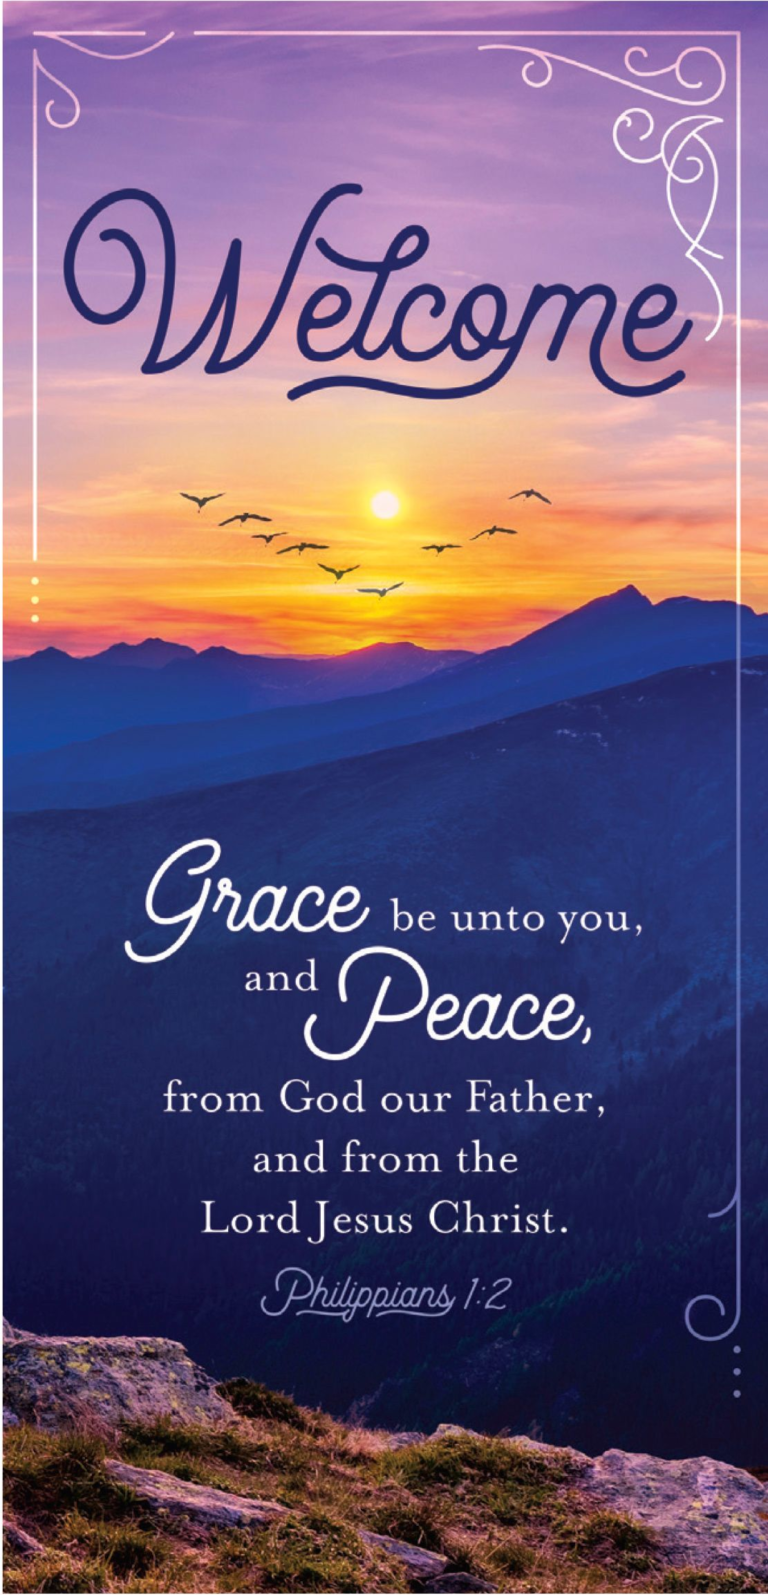 Welcome Grace and Peace – Guest Card (PKG 50)